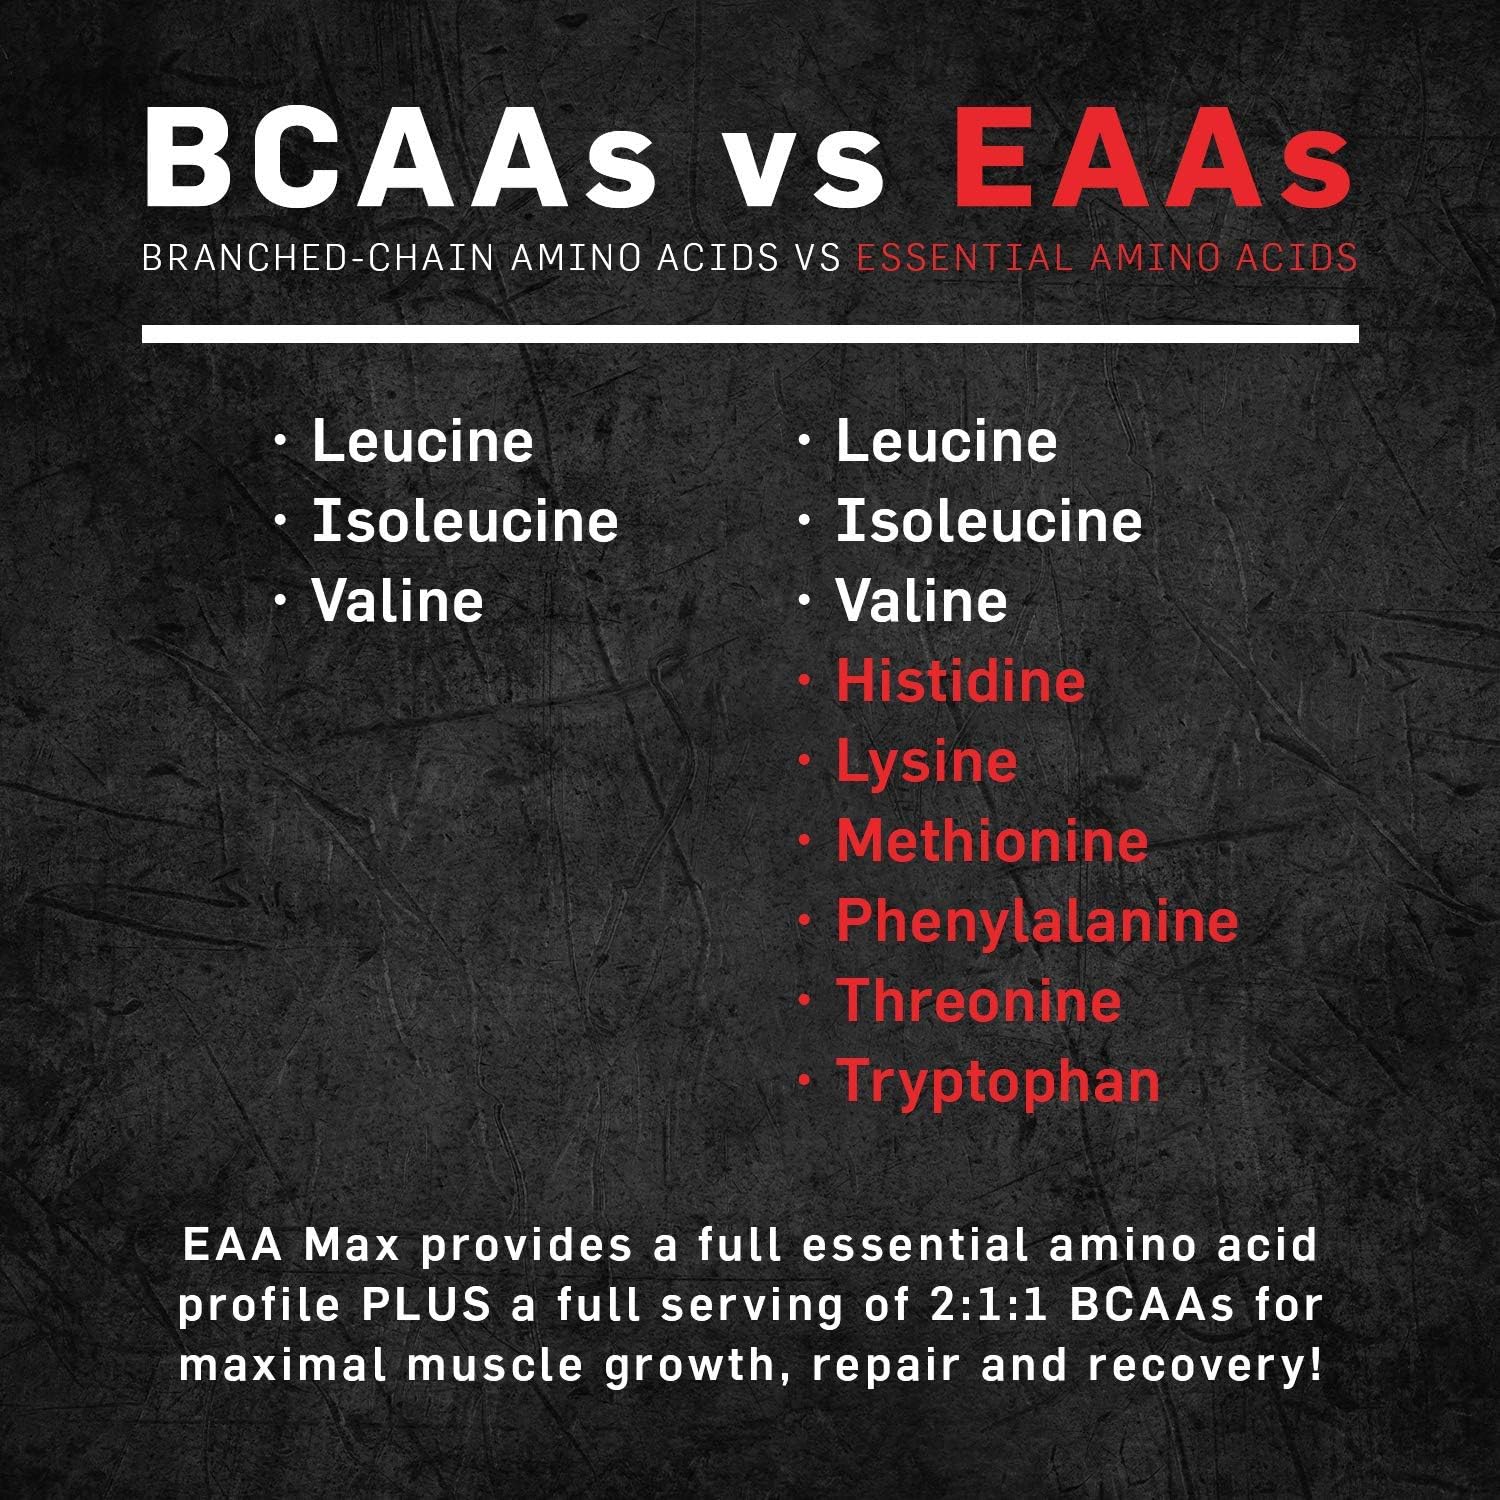  Primeval Labs EAA Max Energy Powder, Muscle Energy & Nutrient Delivery, Enhances Muscle Protein Synthesis, Recovery Powder, Improves Focus, Energy Boost...